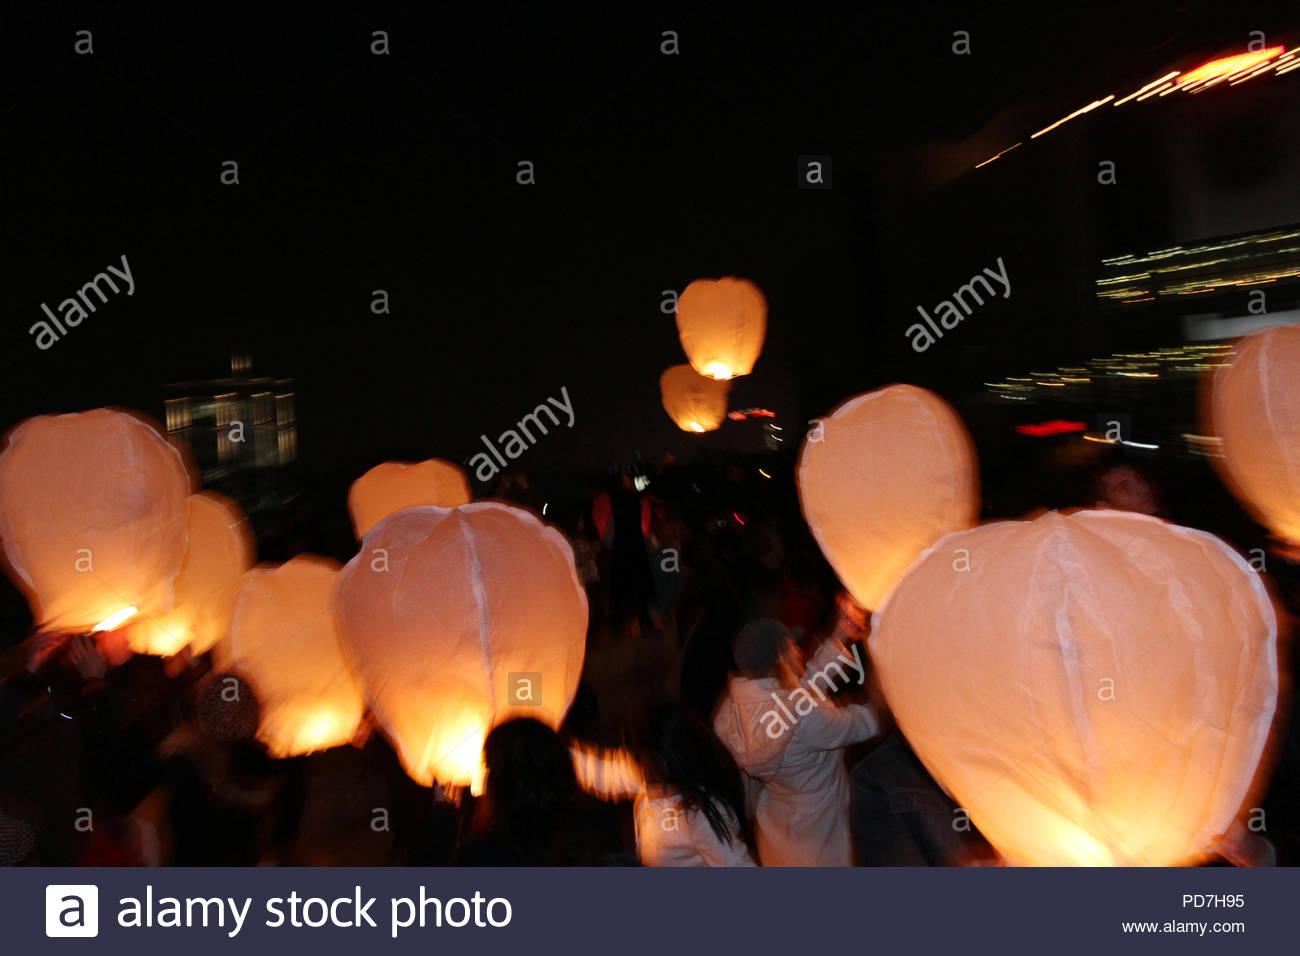 Sky lanterns floating in the sky Deepavali lights festival Chinese